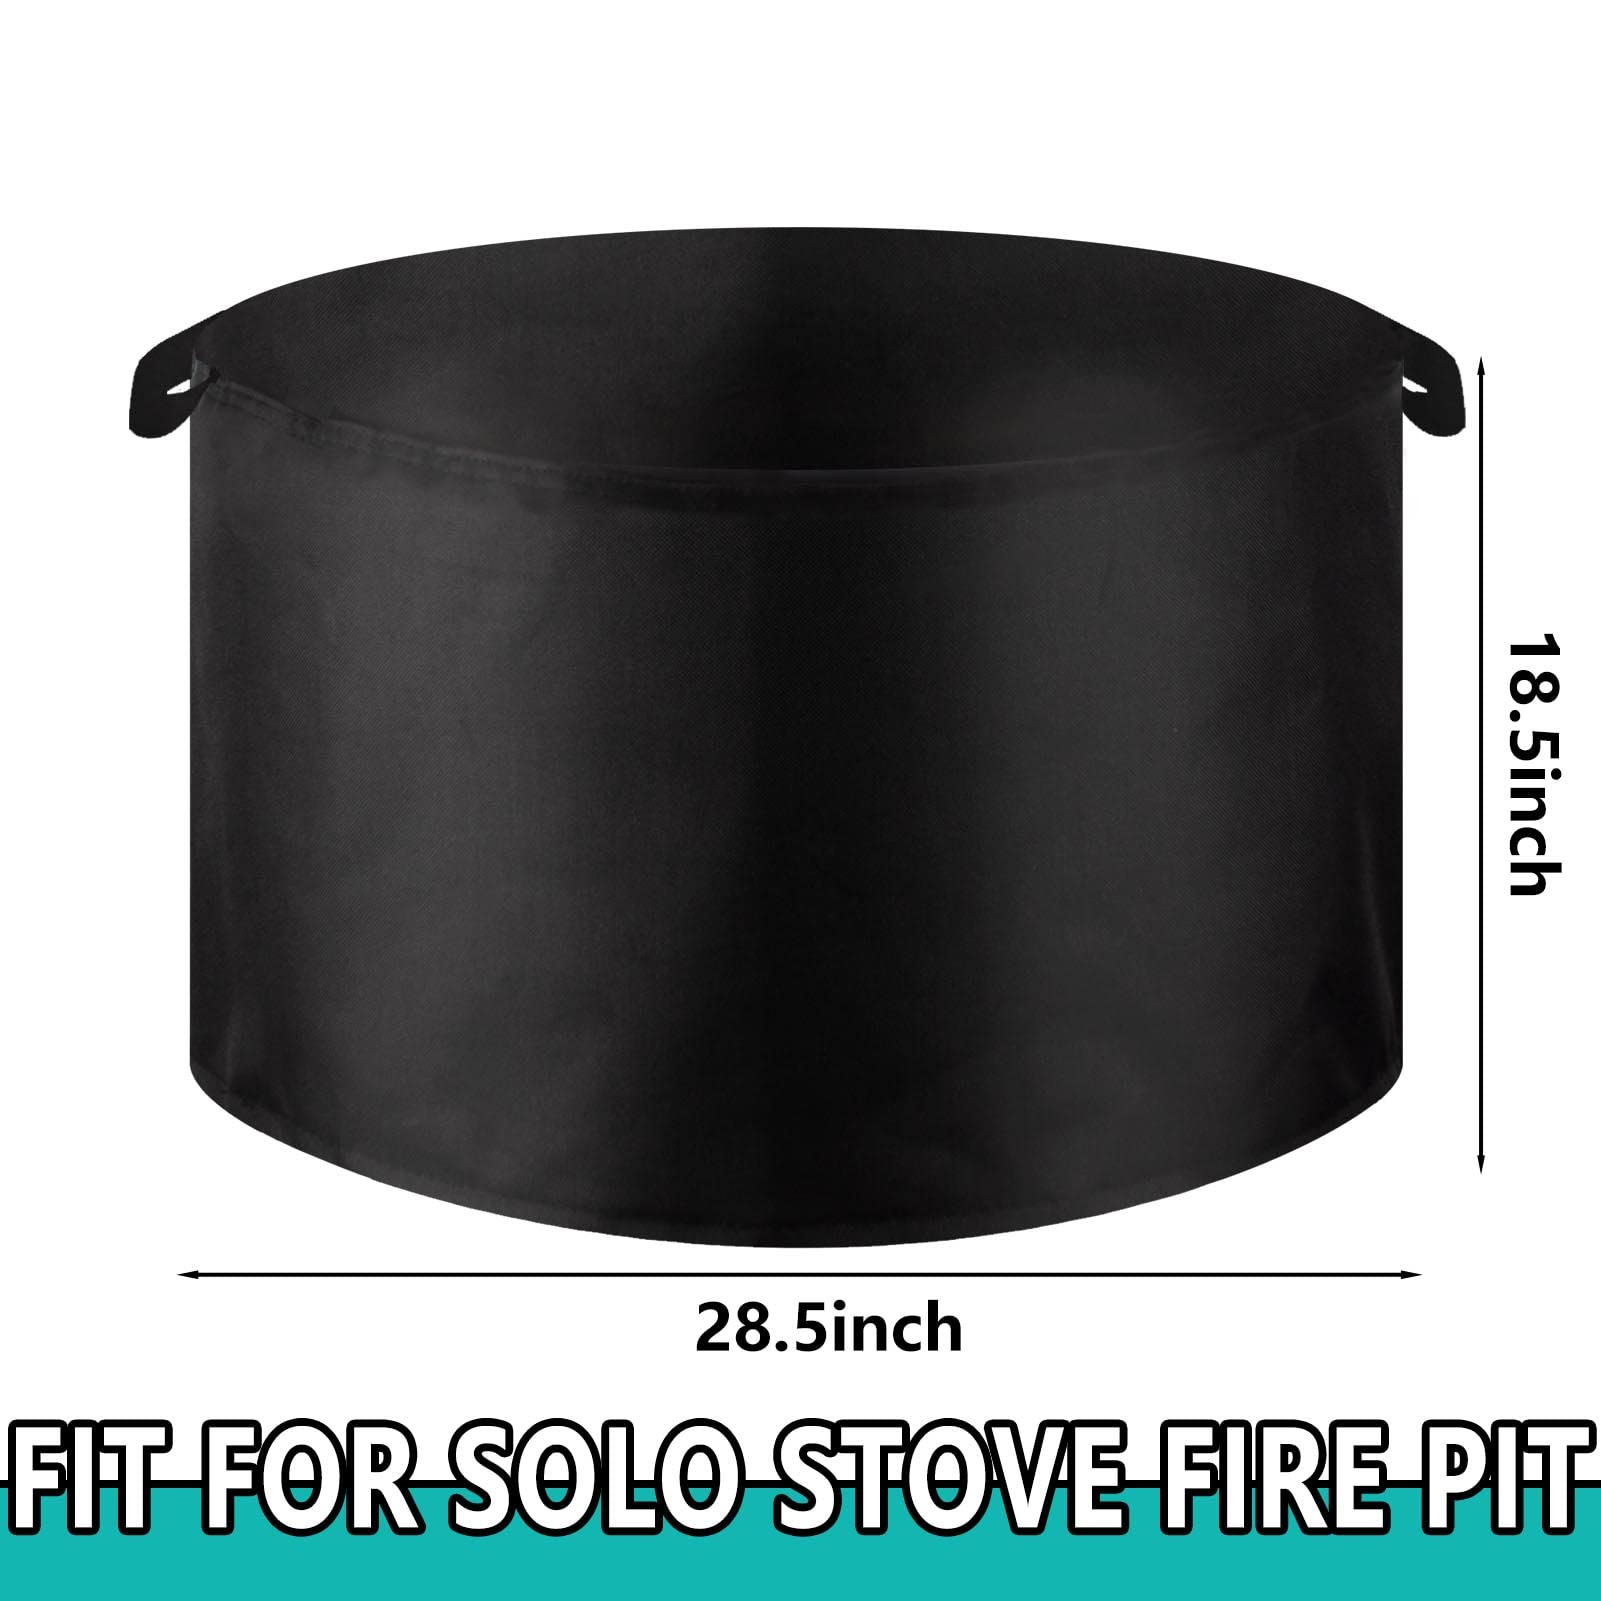 Fire Pit Cover For Solo Stove Cover Compatible with Yukon,Fire Pit Cover Round 27 Inch Outdoor Gas Fire Pit Cover Waterproof Patio Fire Bowl Cover with PVC Coating Compatible with Solo Stove